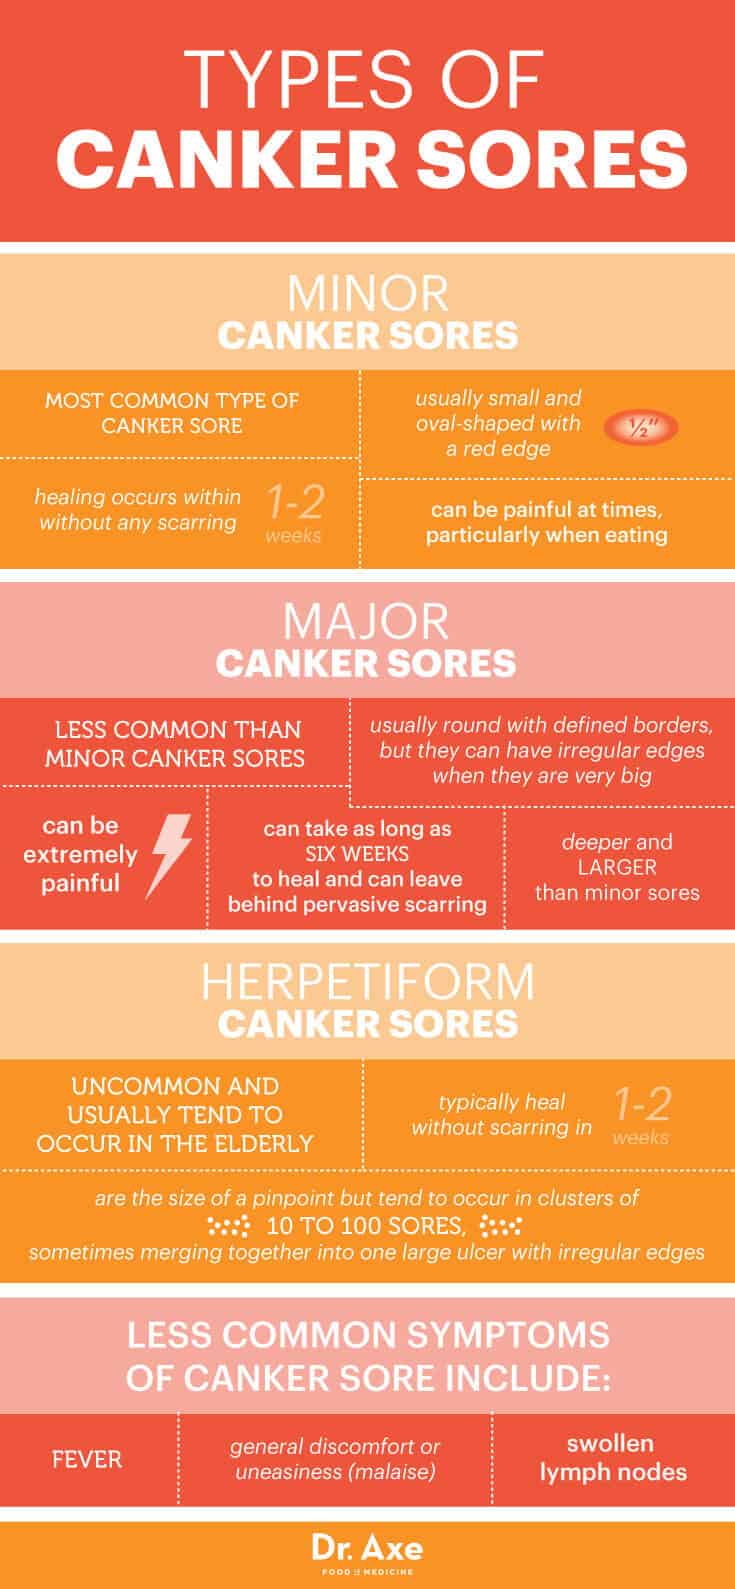 Canker Sore: Symptoms, Types + Natural Remedies - Dr. Axe